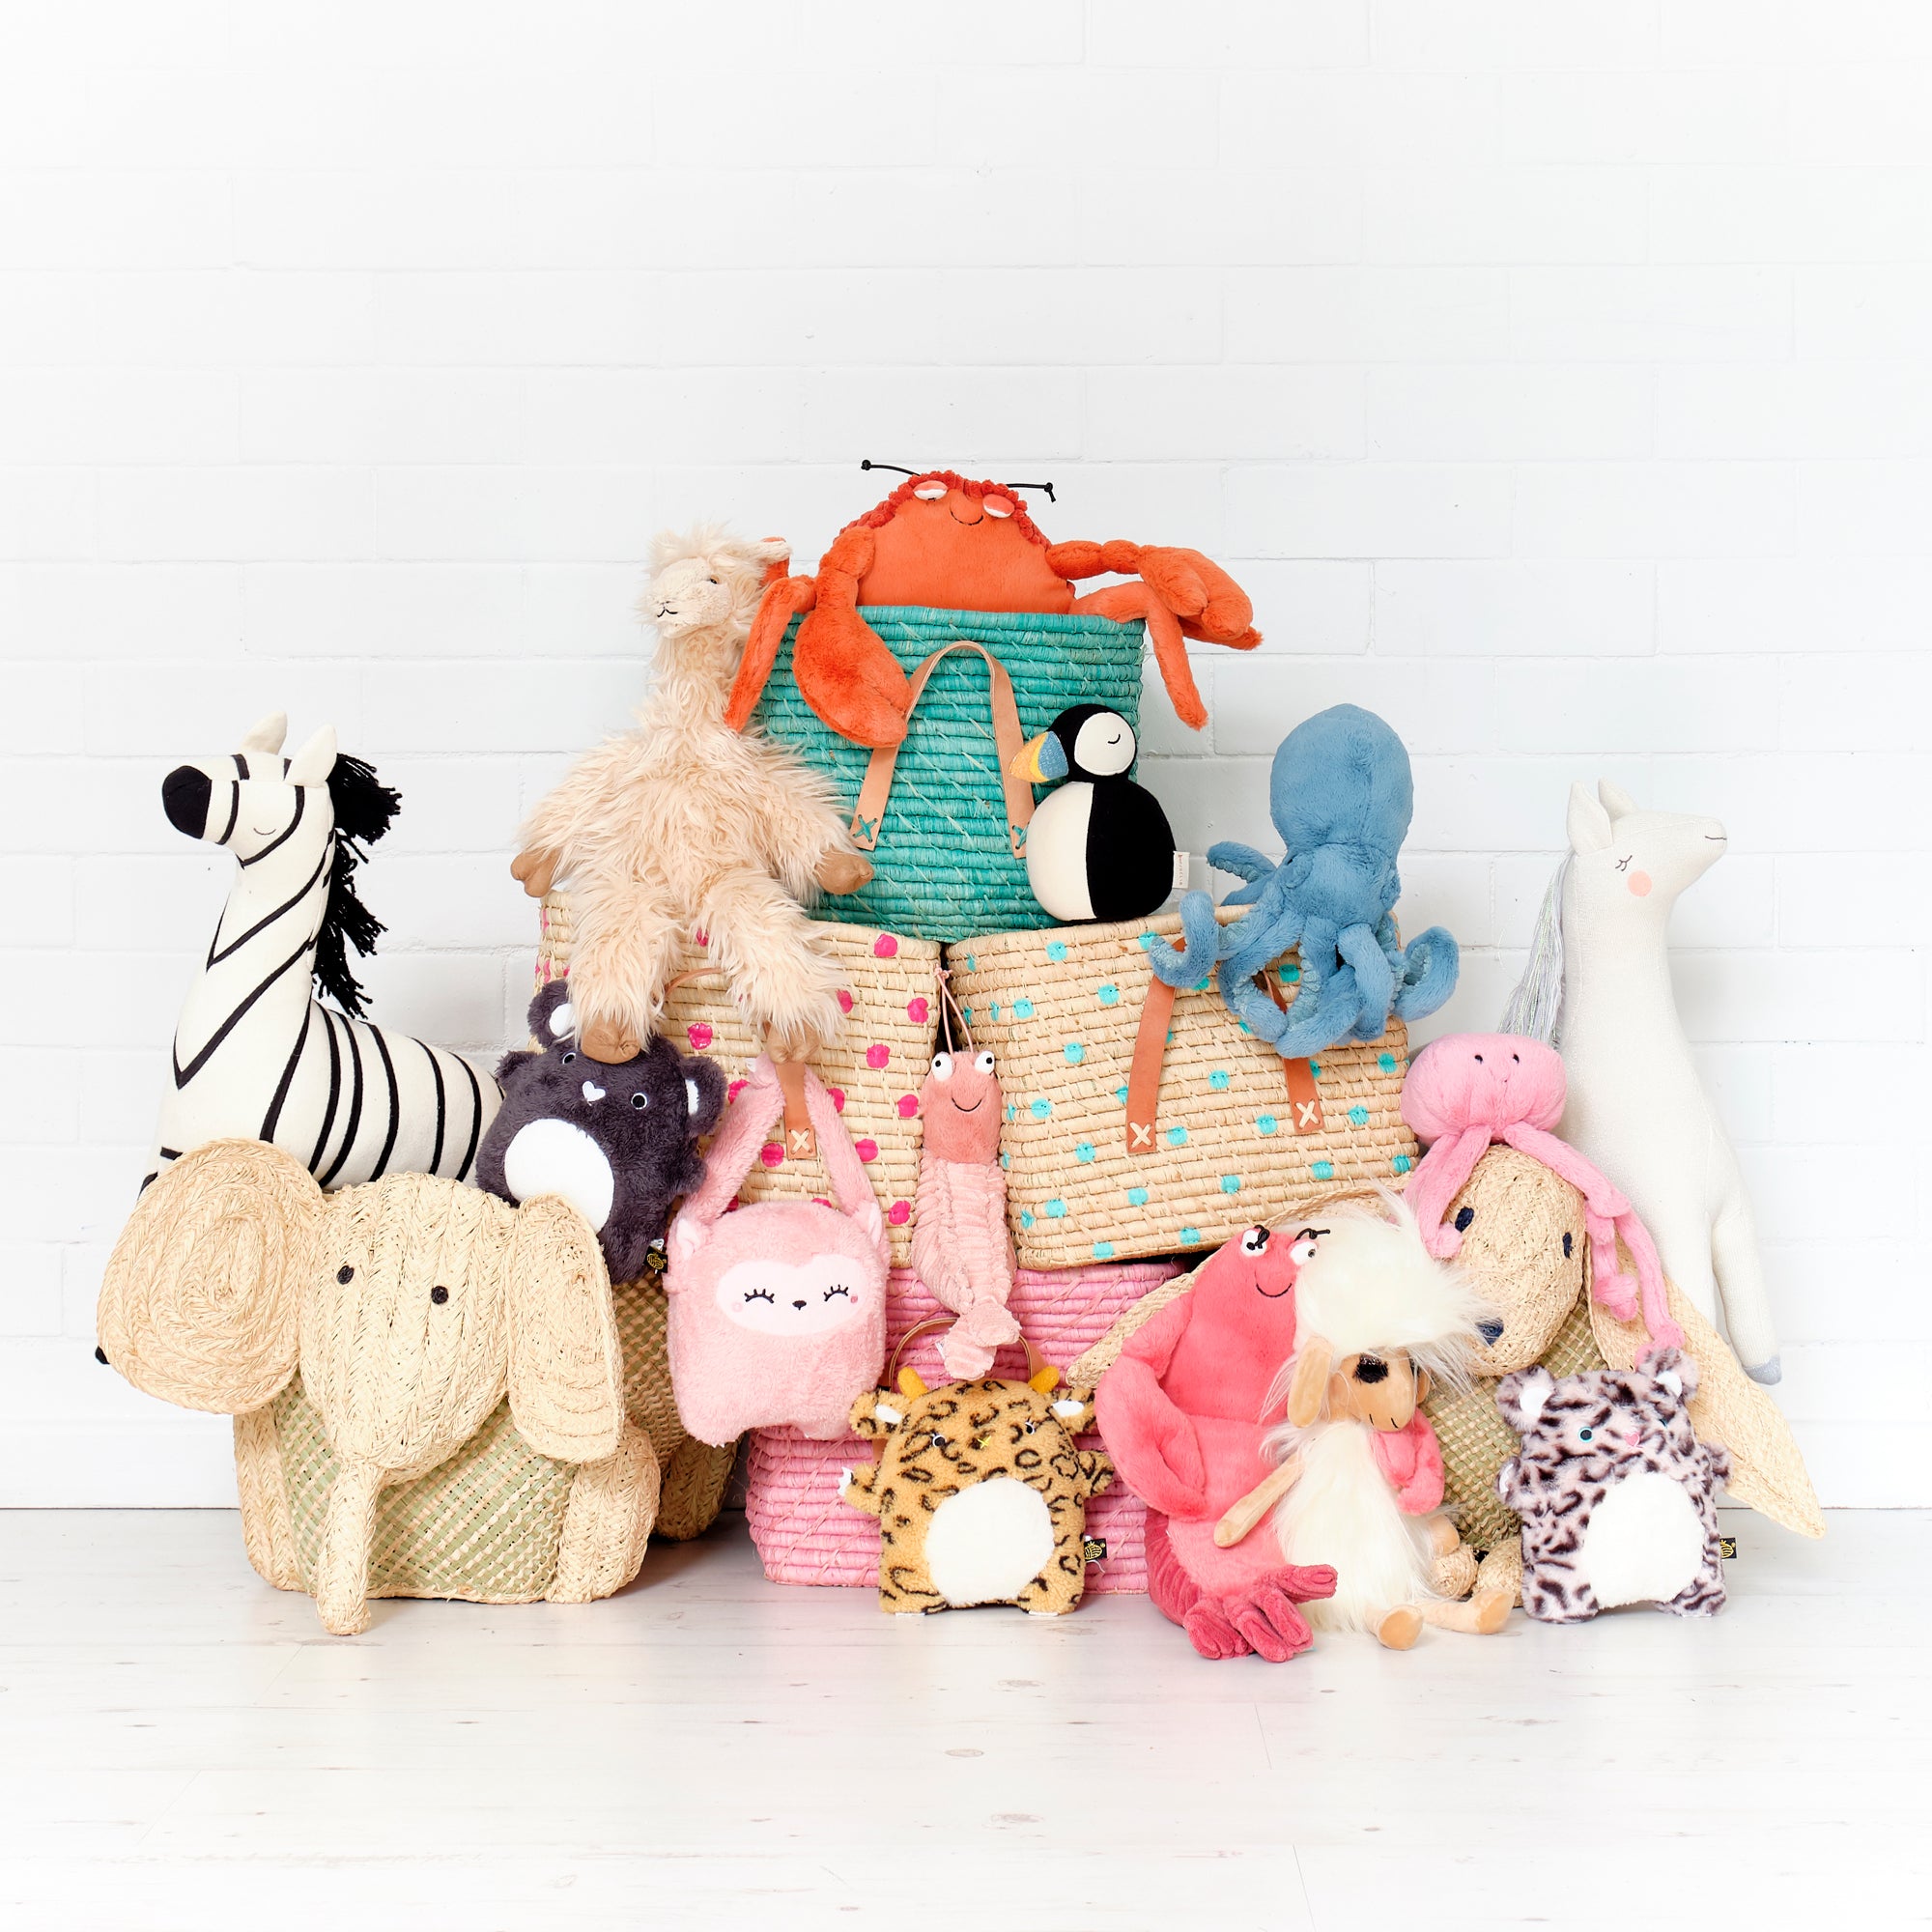 Baskets and Soft Toys, styled by Bobby Rabbit, as featured in Our Royal Baby Book.